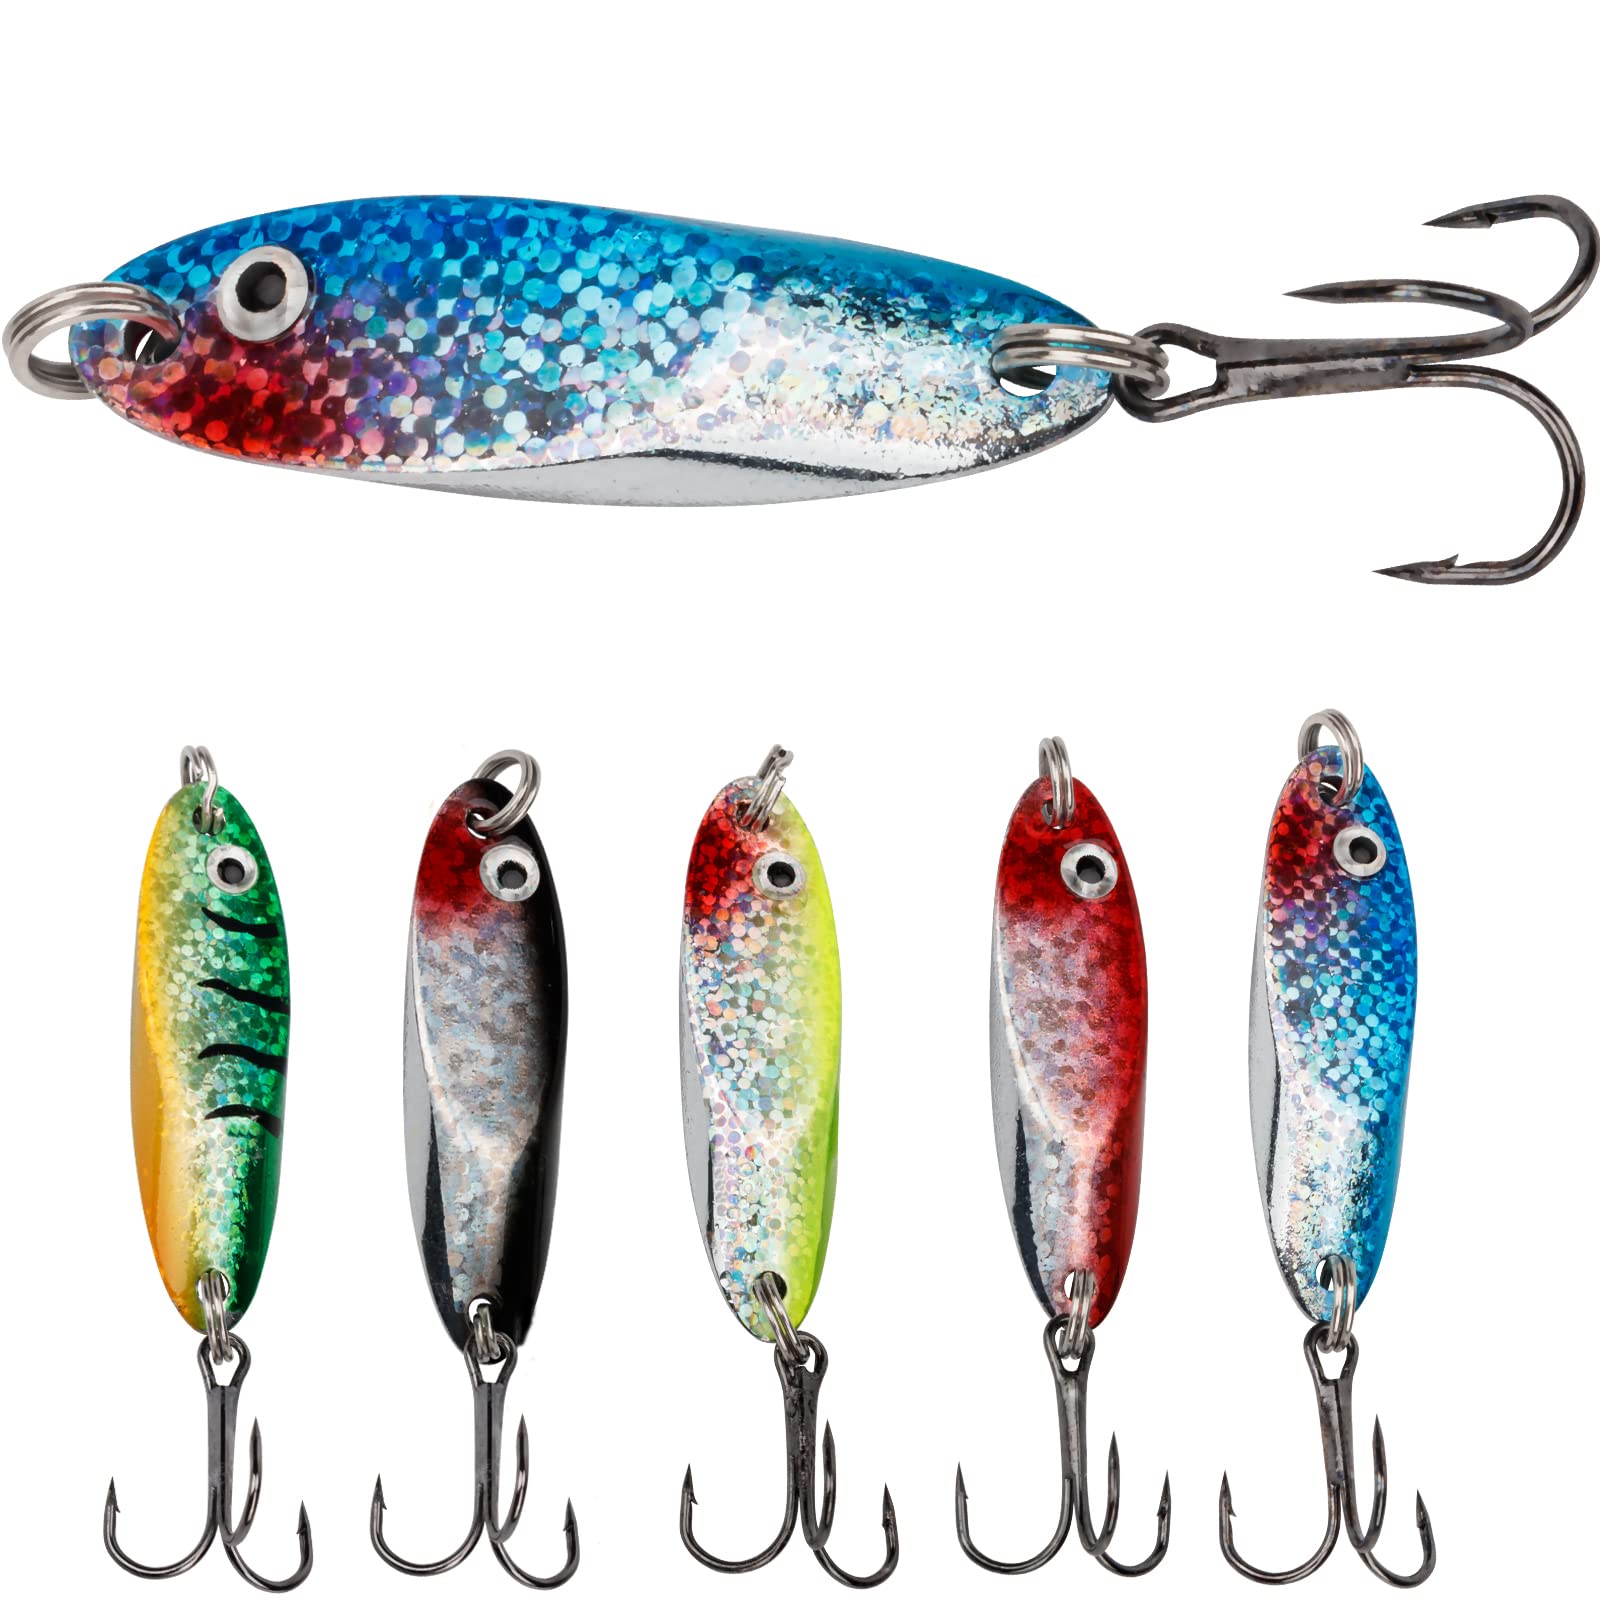 5pcs Fishing Metal Lures Spinner Spoons 3/4oz Casting Trout Pike